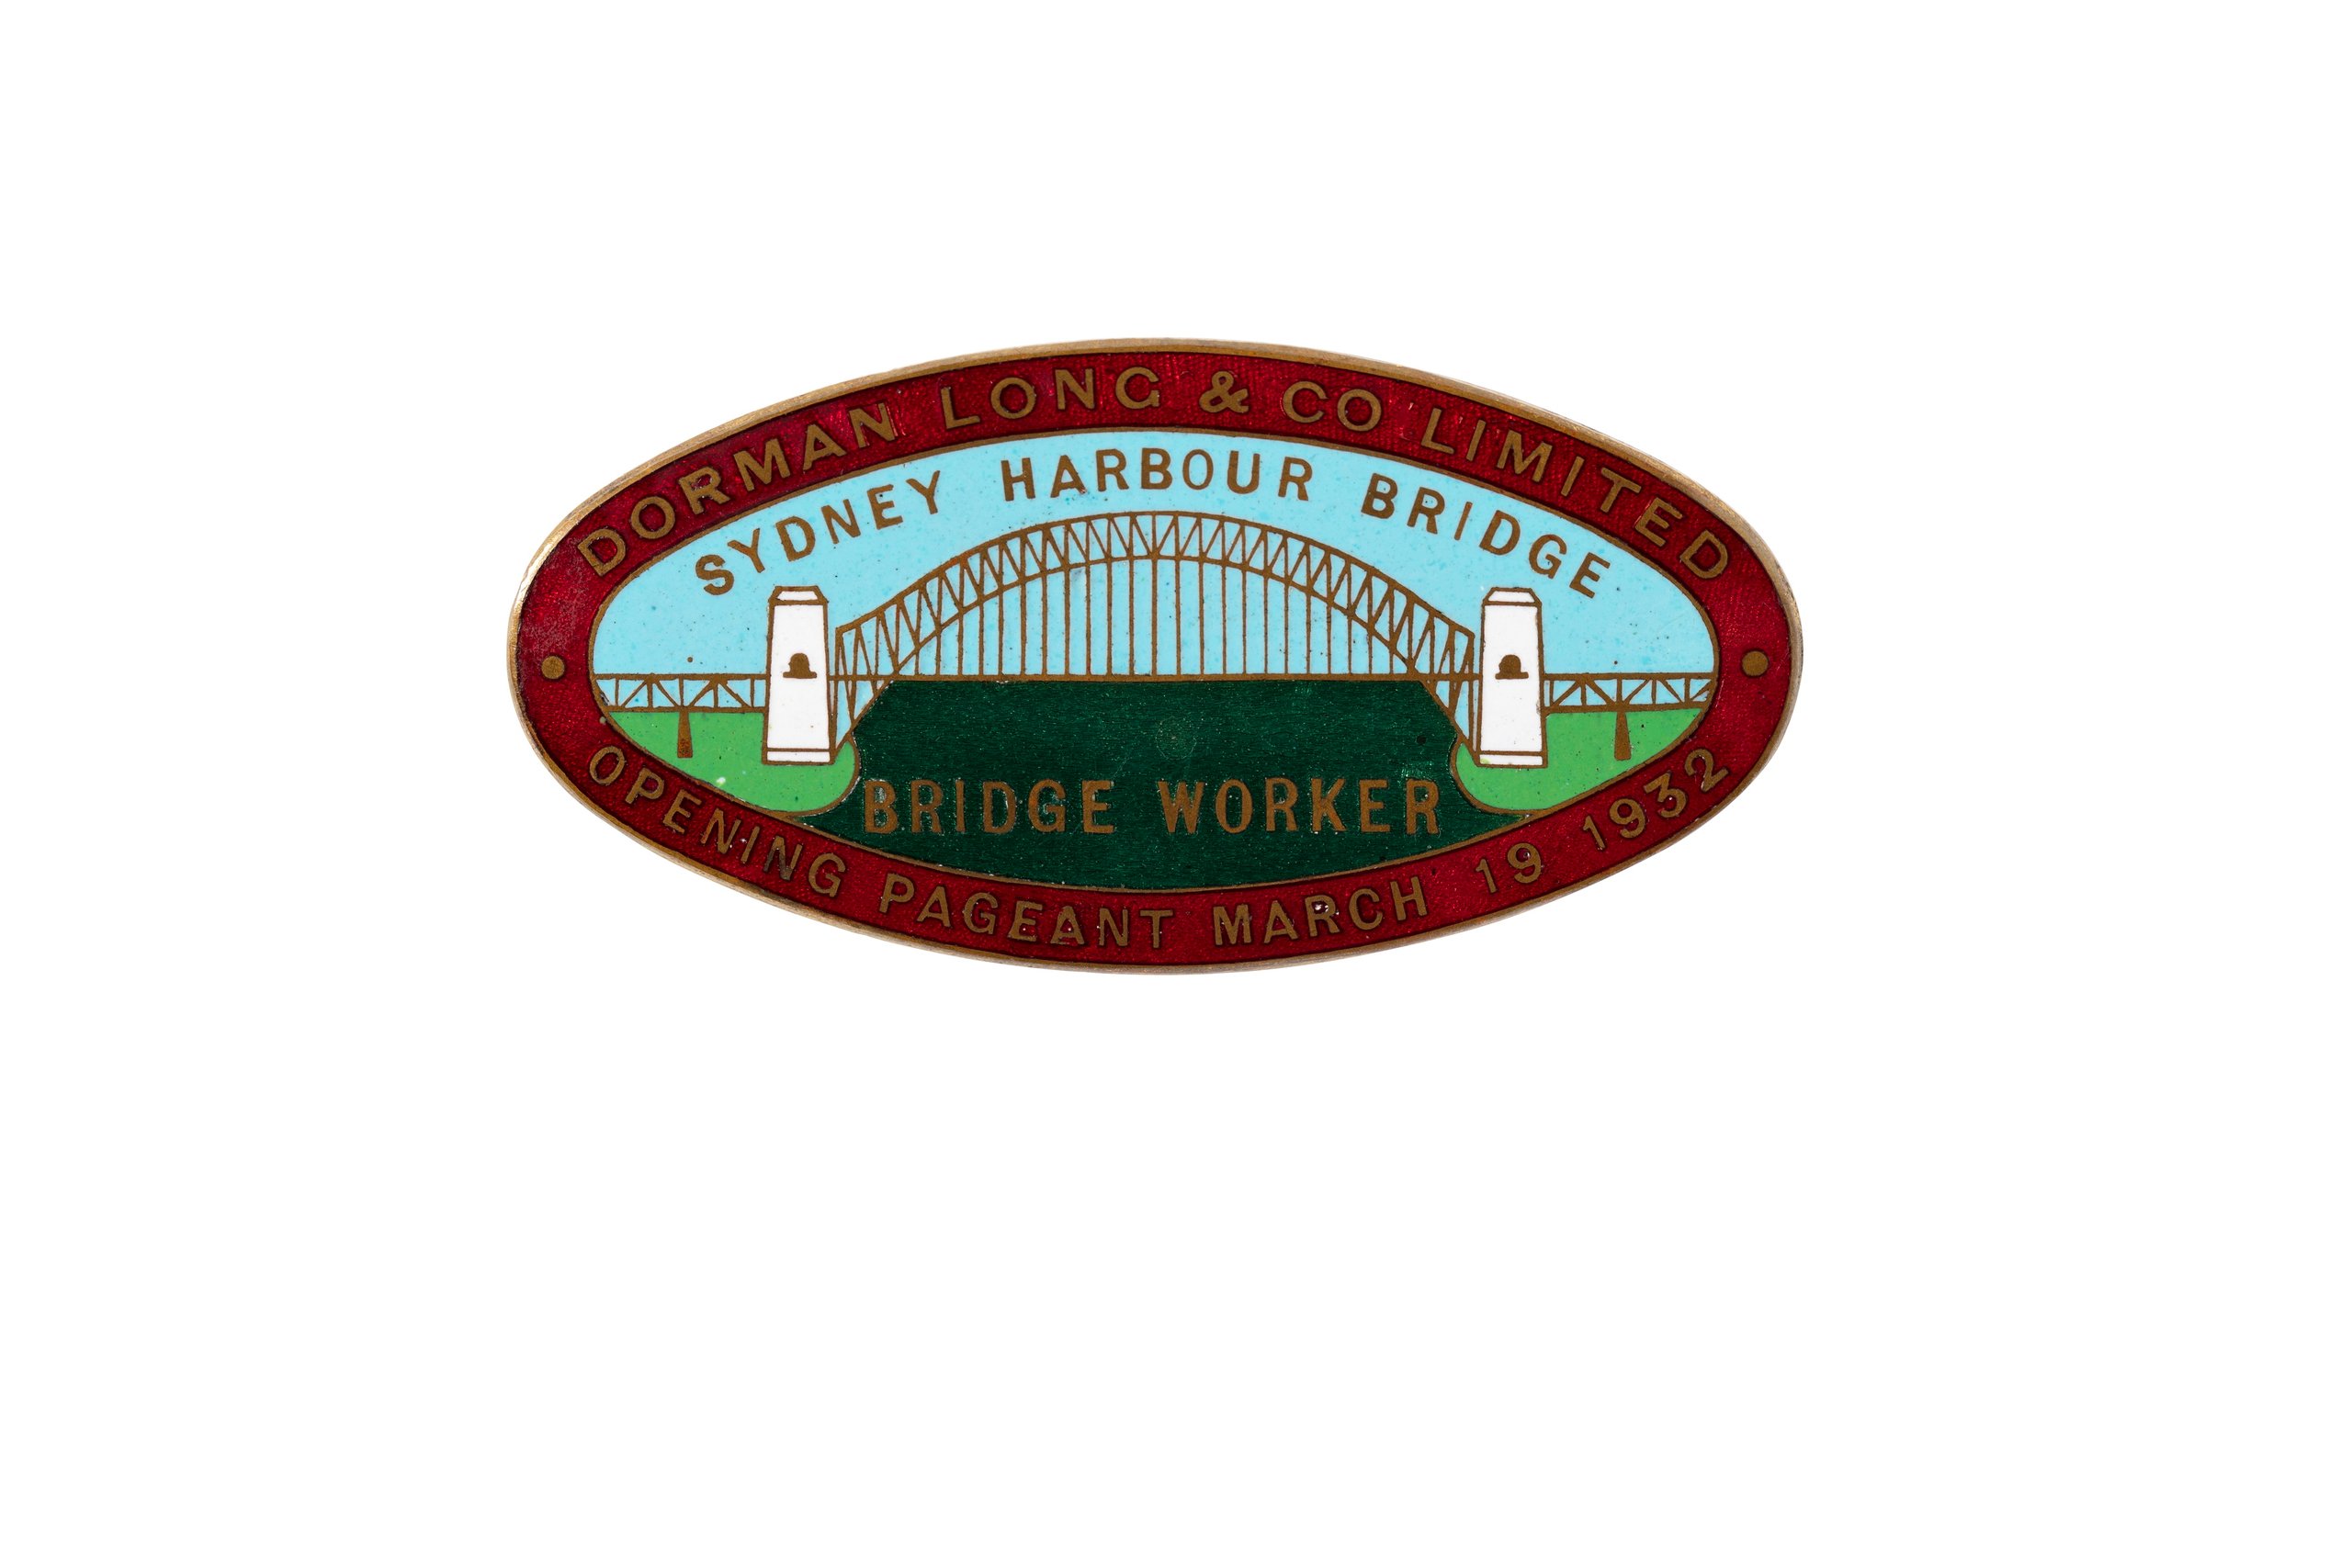 'Bridge Worker' badge for the Sydney Harbour Bridge Opening Pageant March